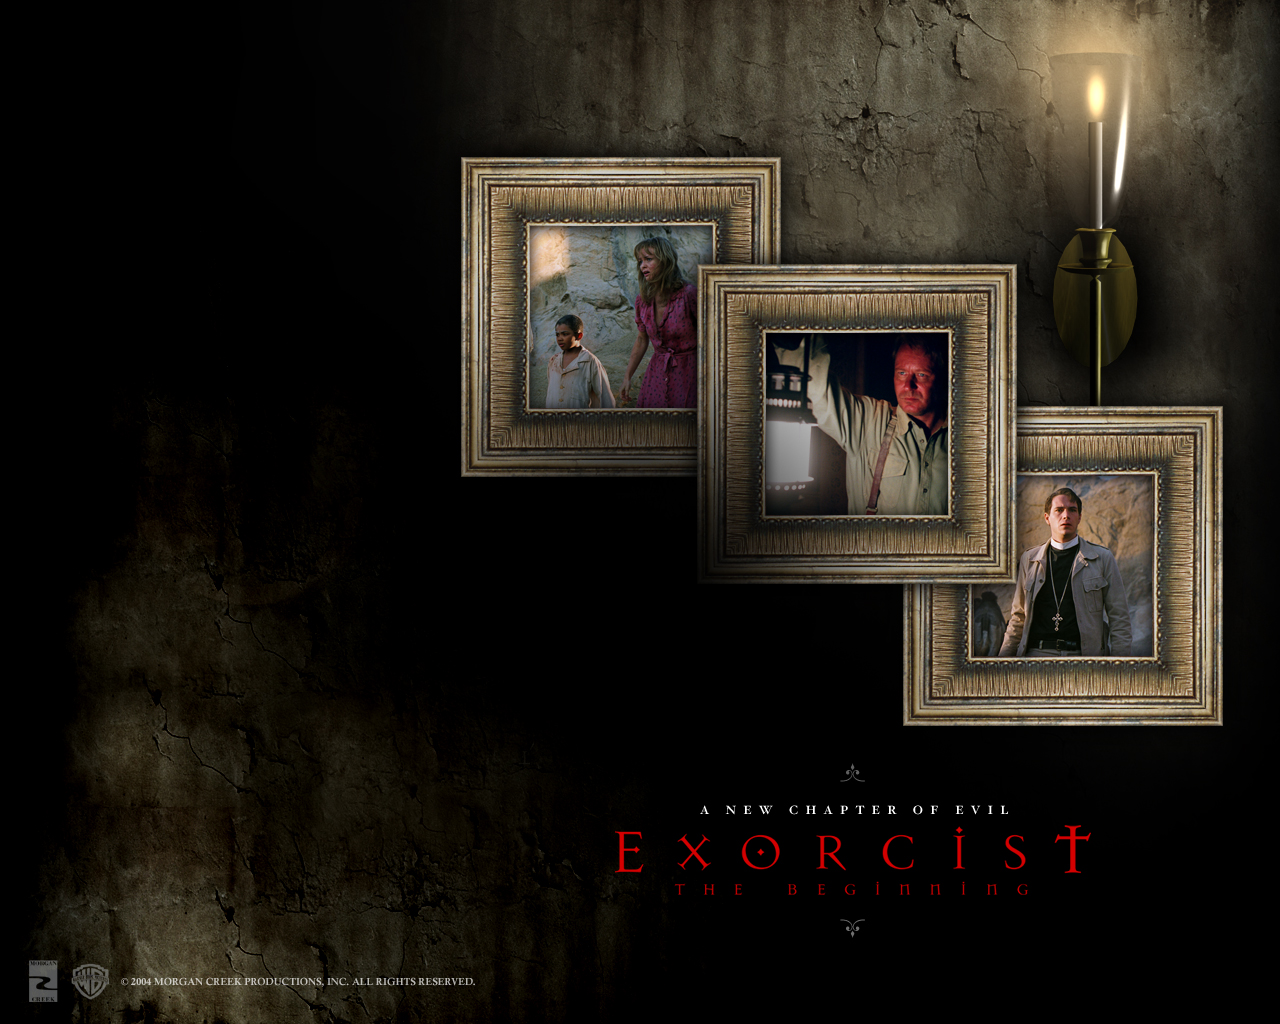 Download HQ Exorcist wallpaper / Movies / 1280x1024